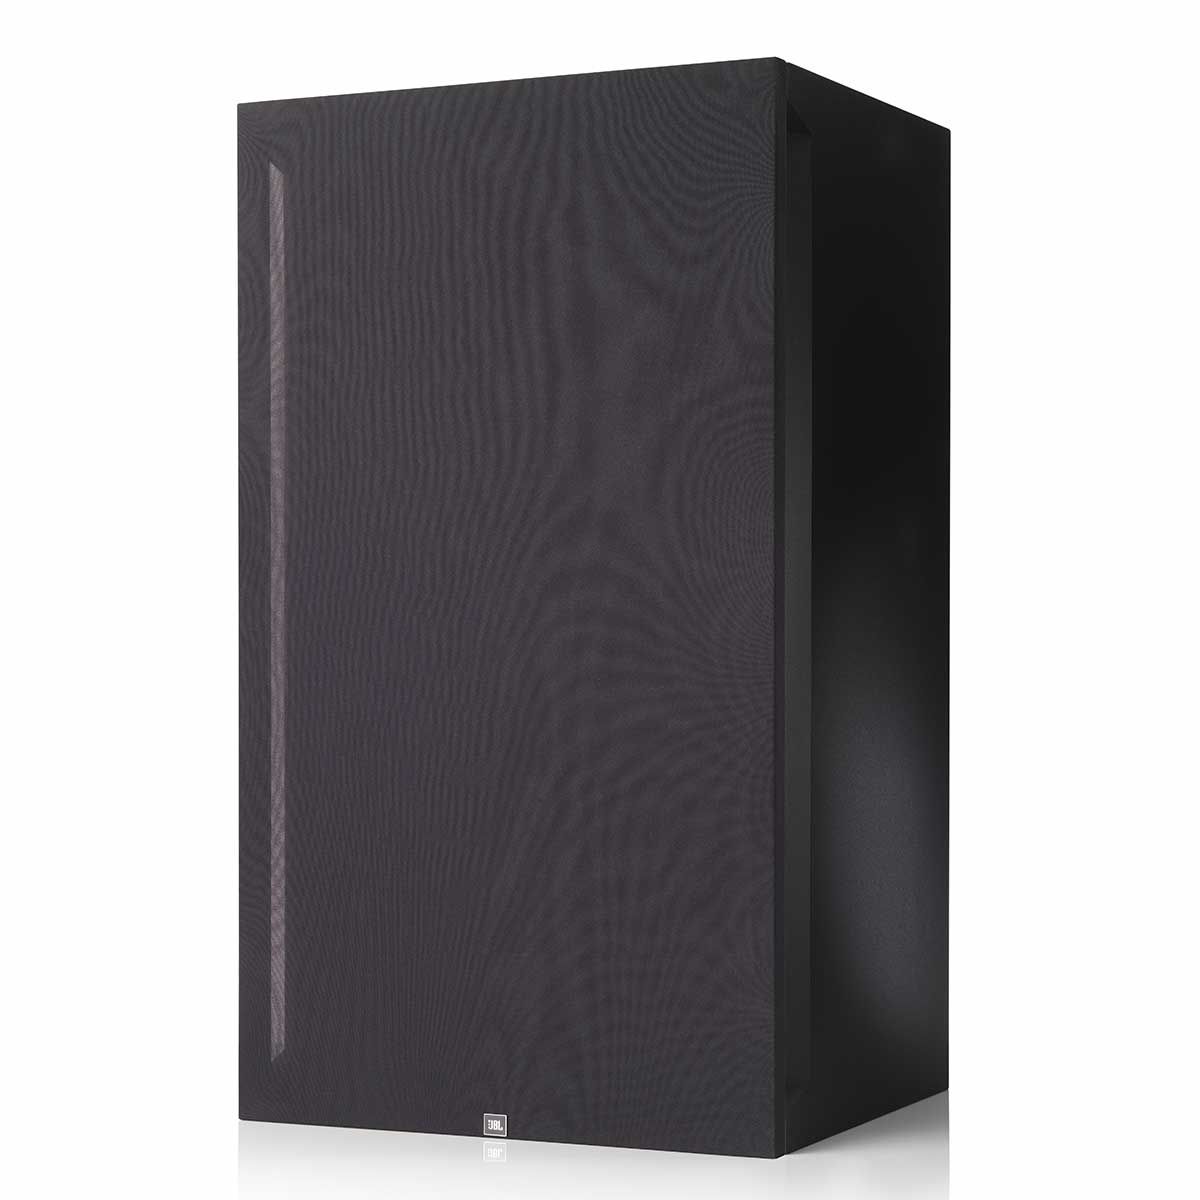 JBL Synthesis SSW-2 Dual Subwoofer, Black, vertical position, front view with grille